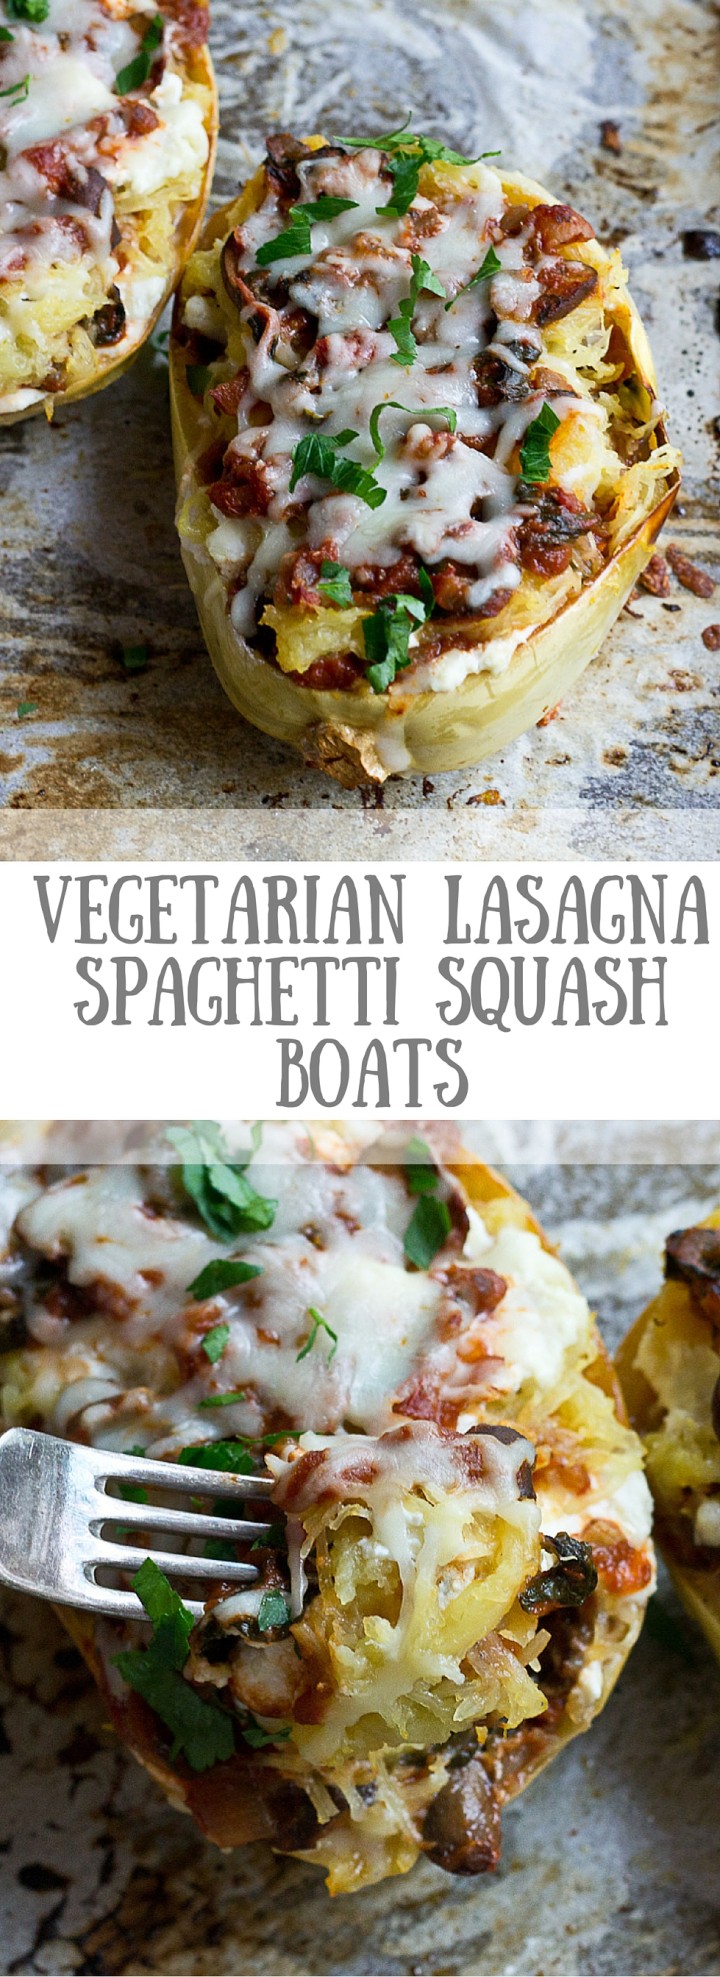 These Vegetarian Lasagna Spaghetti Squash Boats will rock your world. It's super filling and each boat is packed with several cups of mushrooms, onions, and spinach! Talk about veggie-fied. You're going to love this lower carb and meatless take on lasagna that will satisfy that pasta craving.